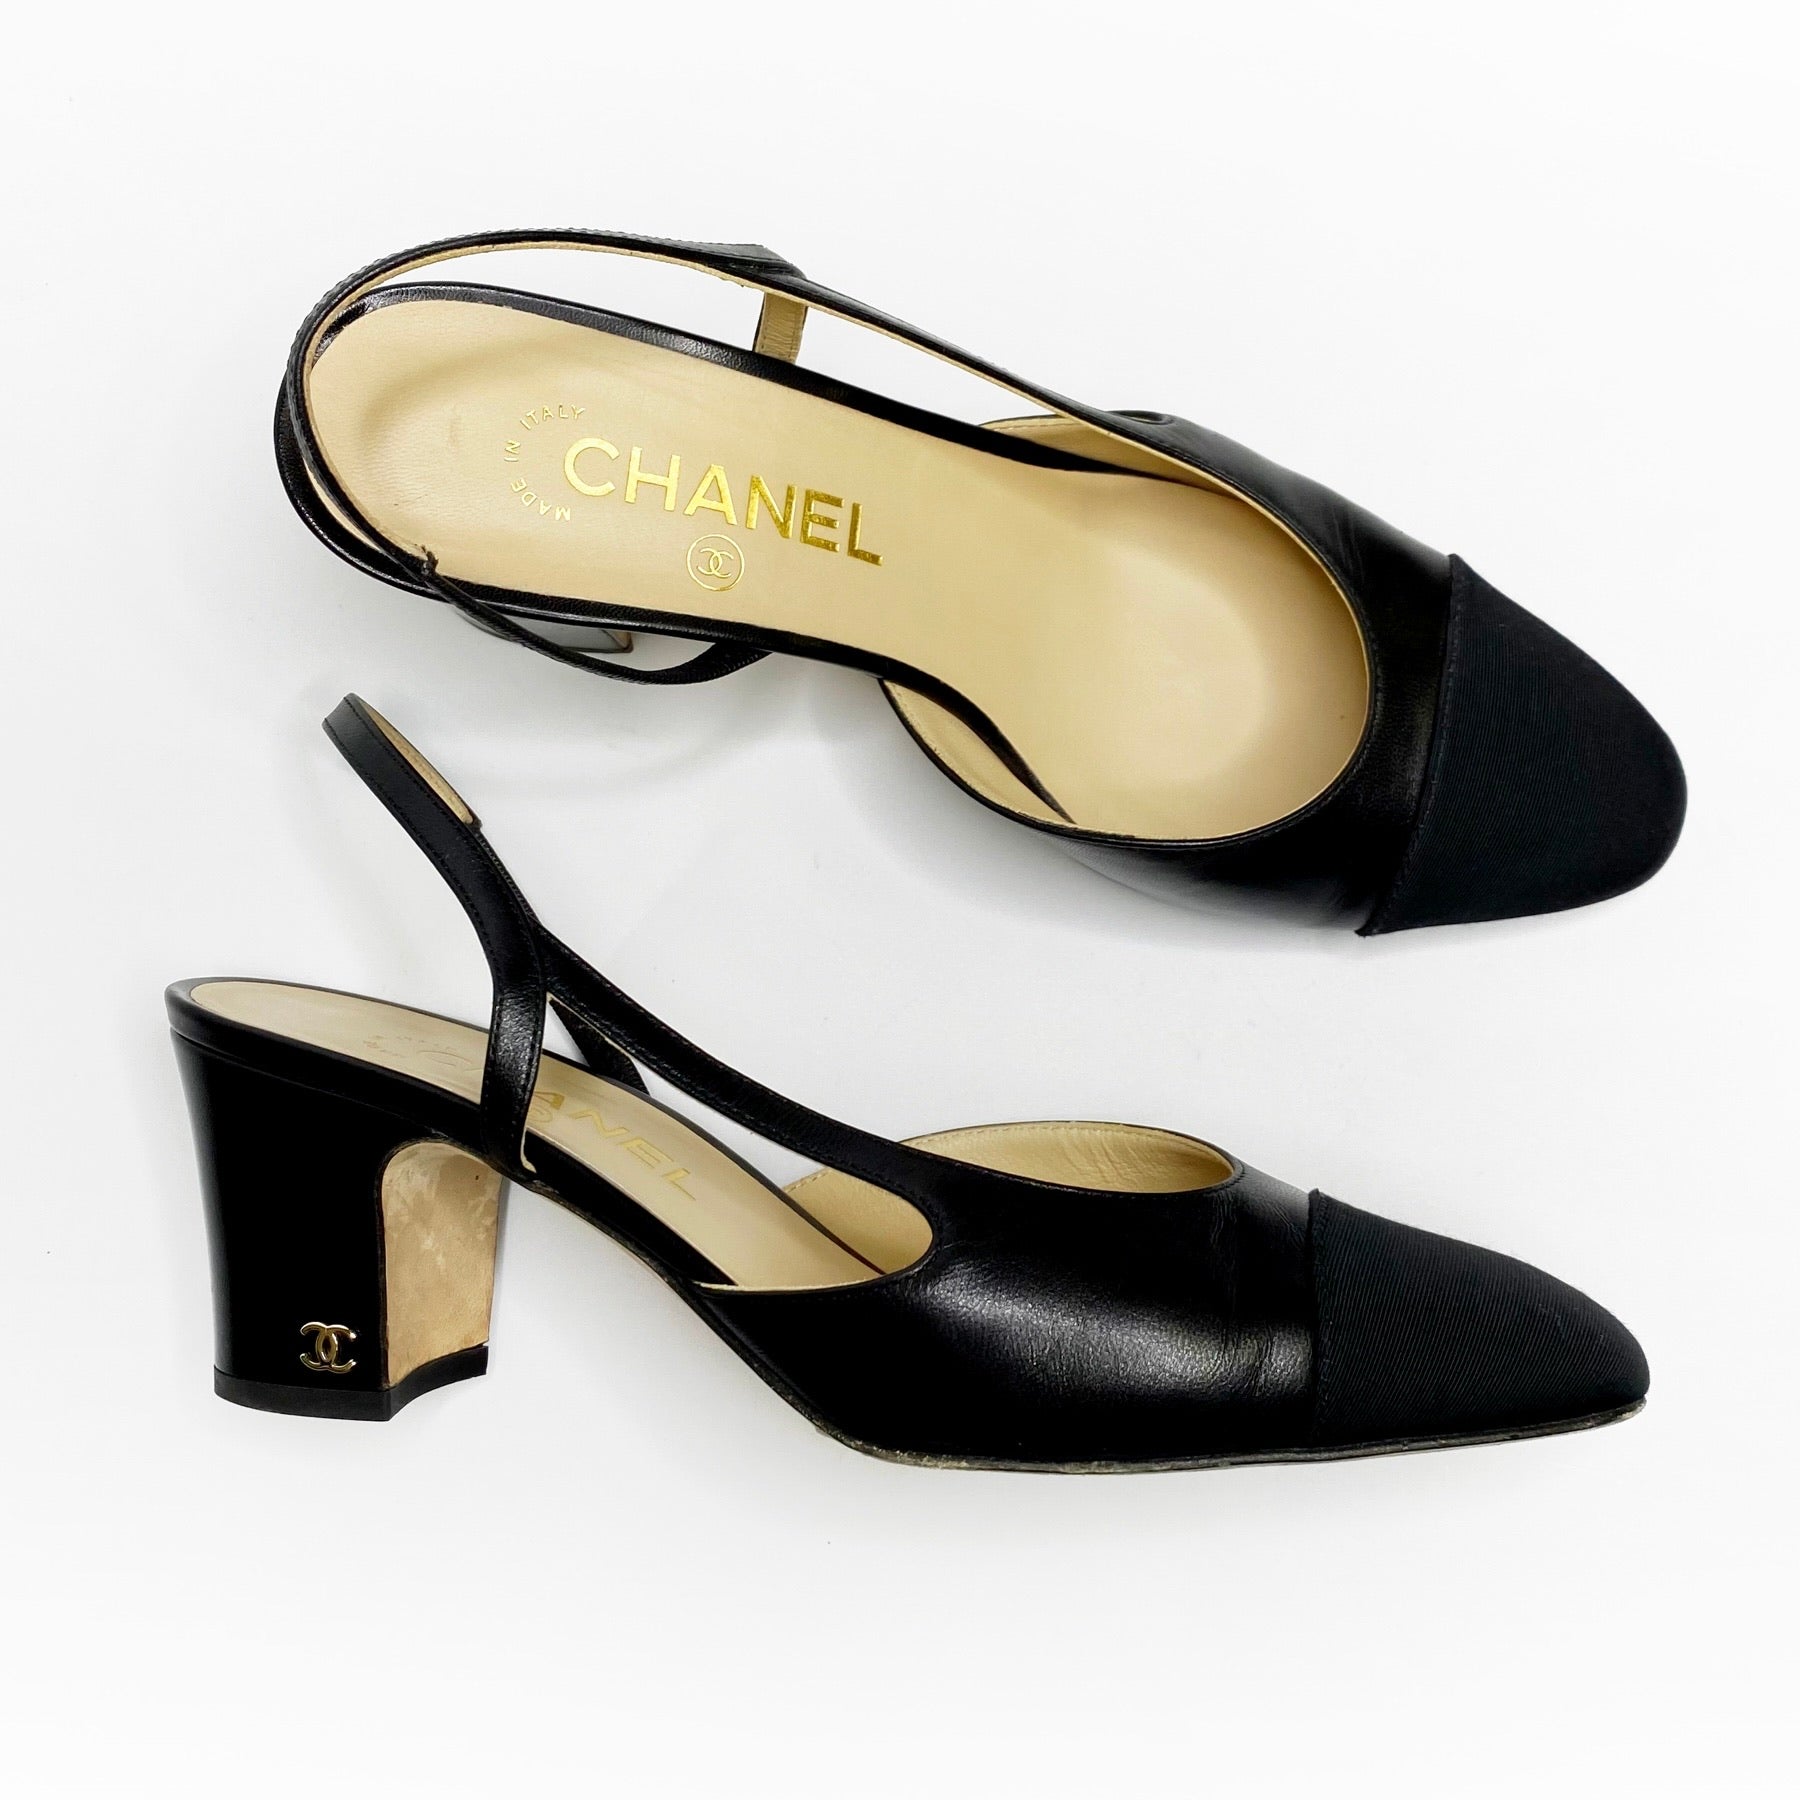 Chanel Shoe Mademoiselle Leather Camel Black Grosgrain 39.5 / 9.5 at 1stDibs   camel and black shoes, chanel mademoiselle shoes, chanel beige and black  shoes